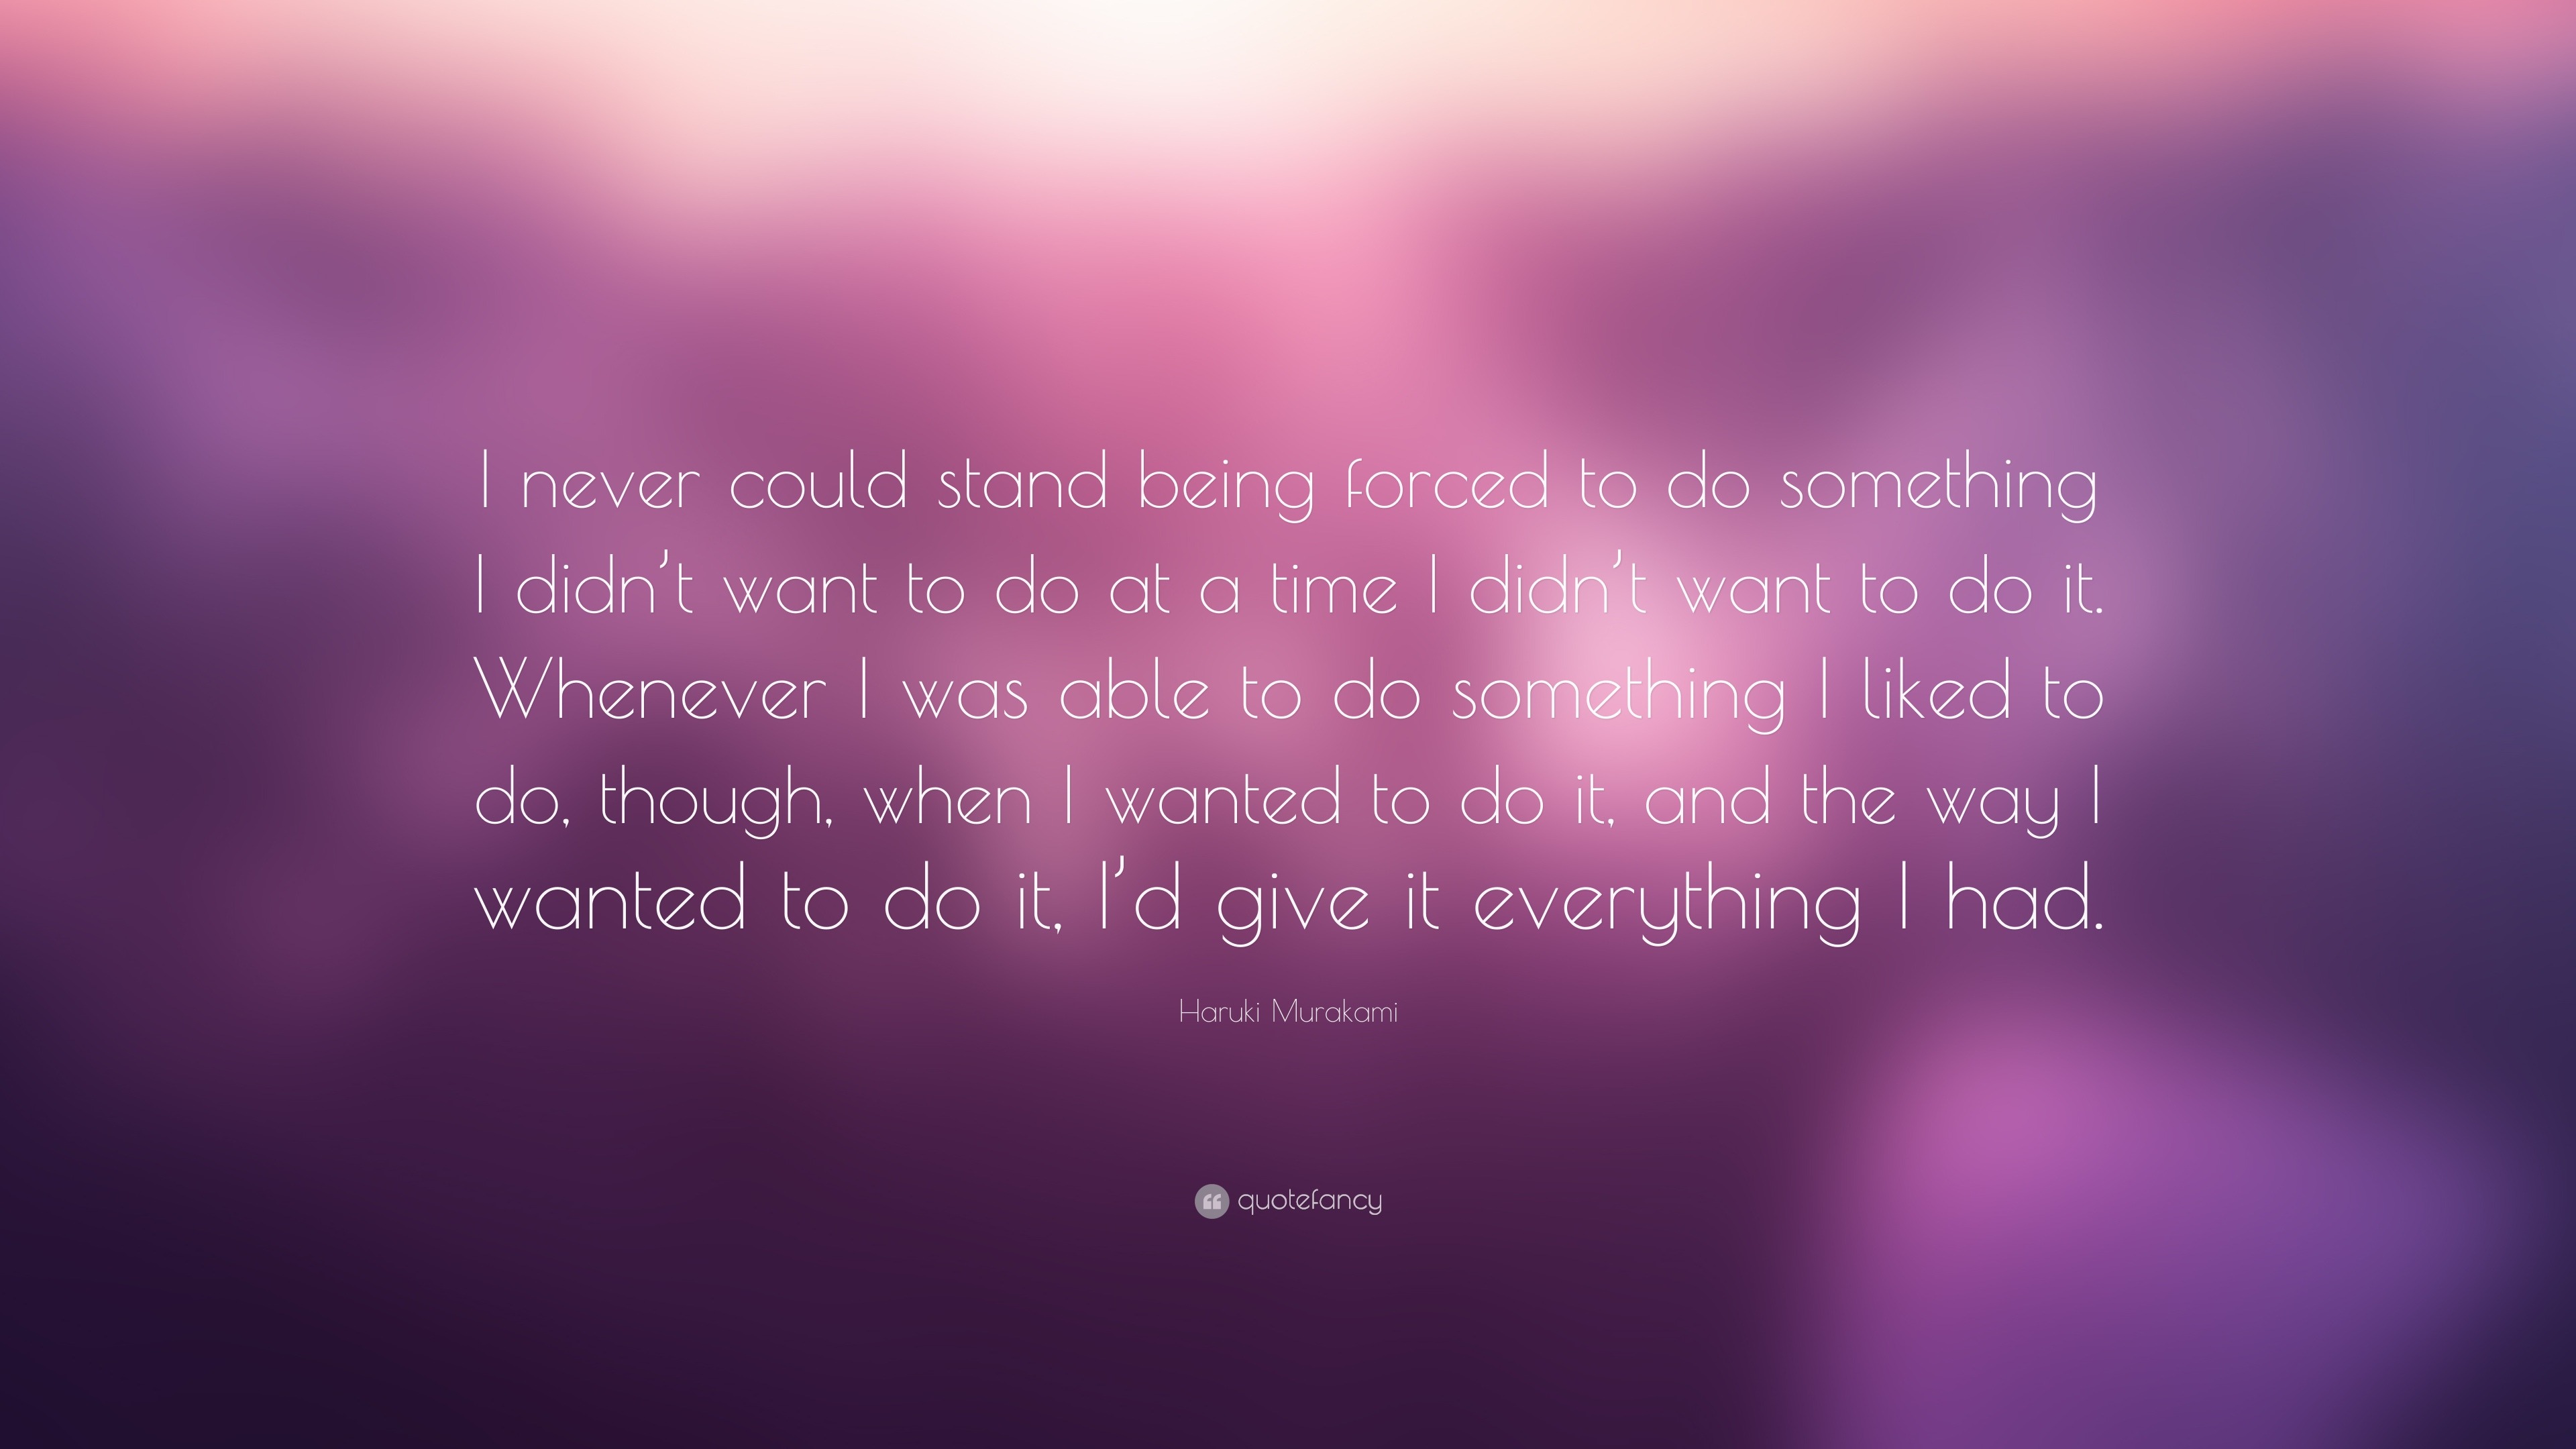 Haruki Murakami Quote: “I never could stand being forced to do ...